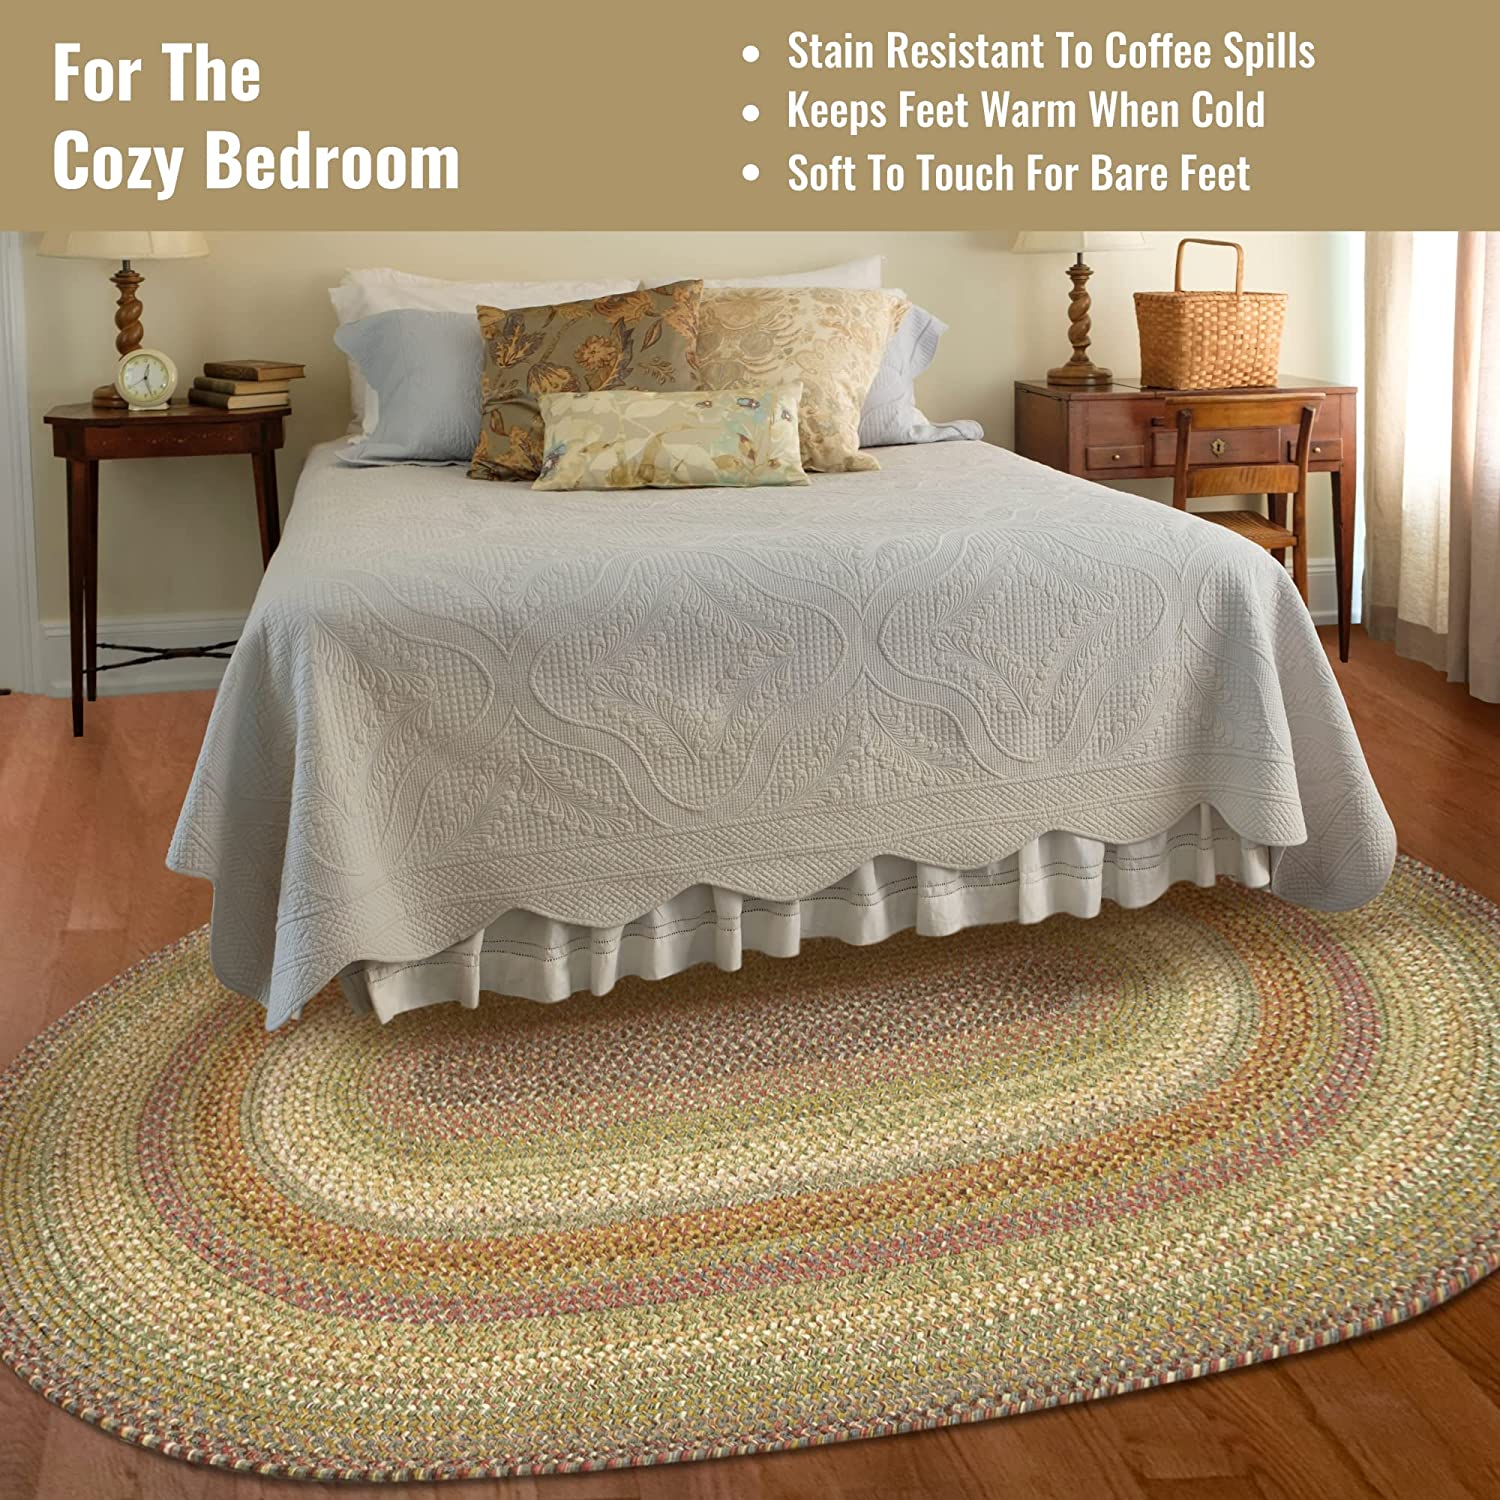 Rainforest Multi Color Ultra Durable Braided Oval Rugs - Braided-Rugs.com